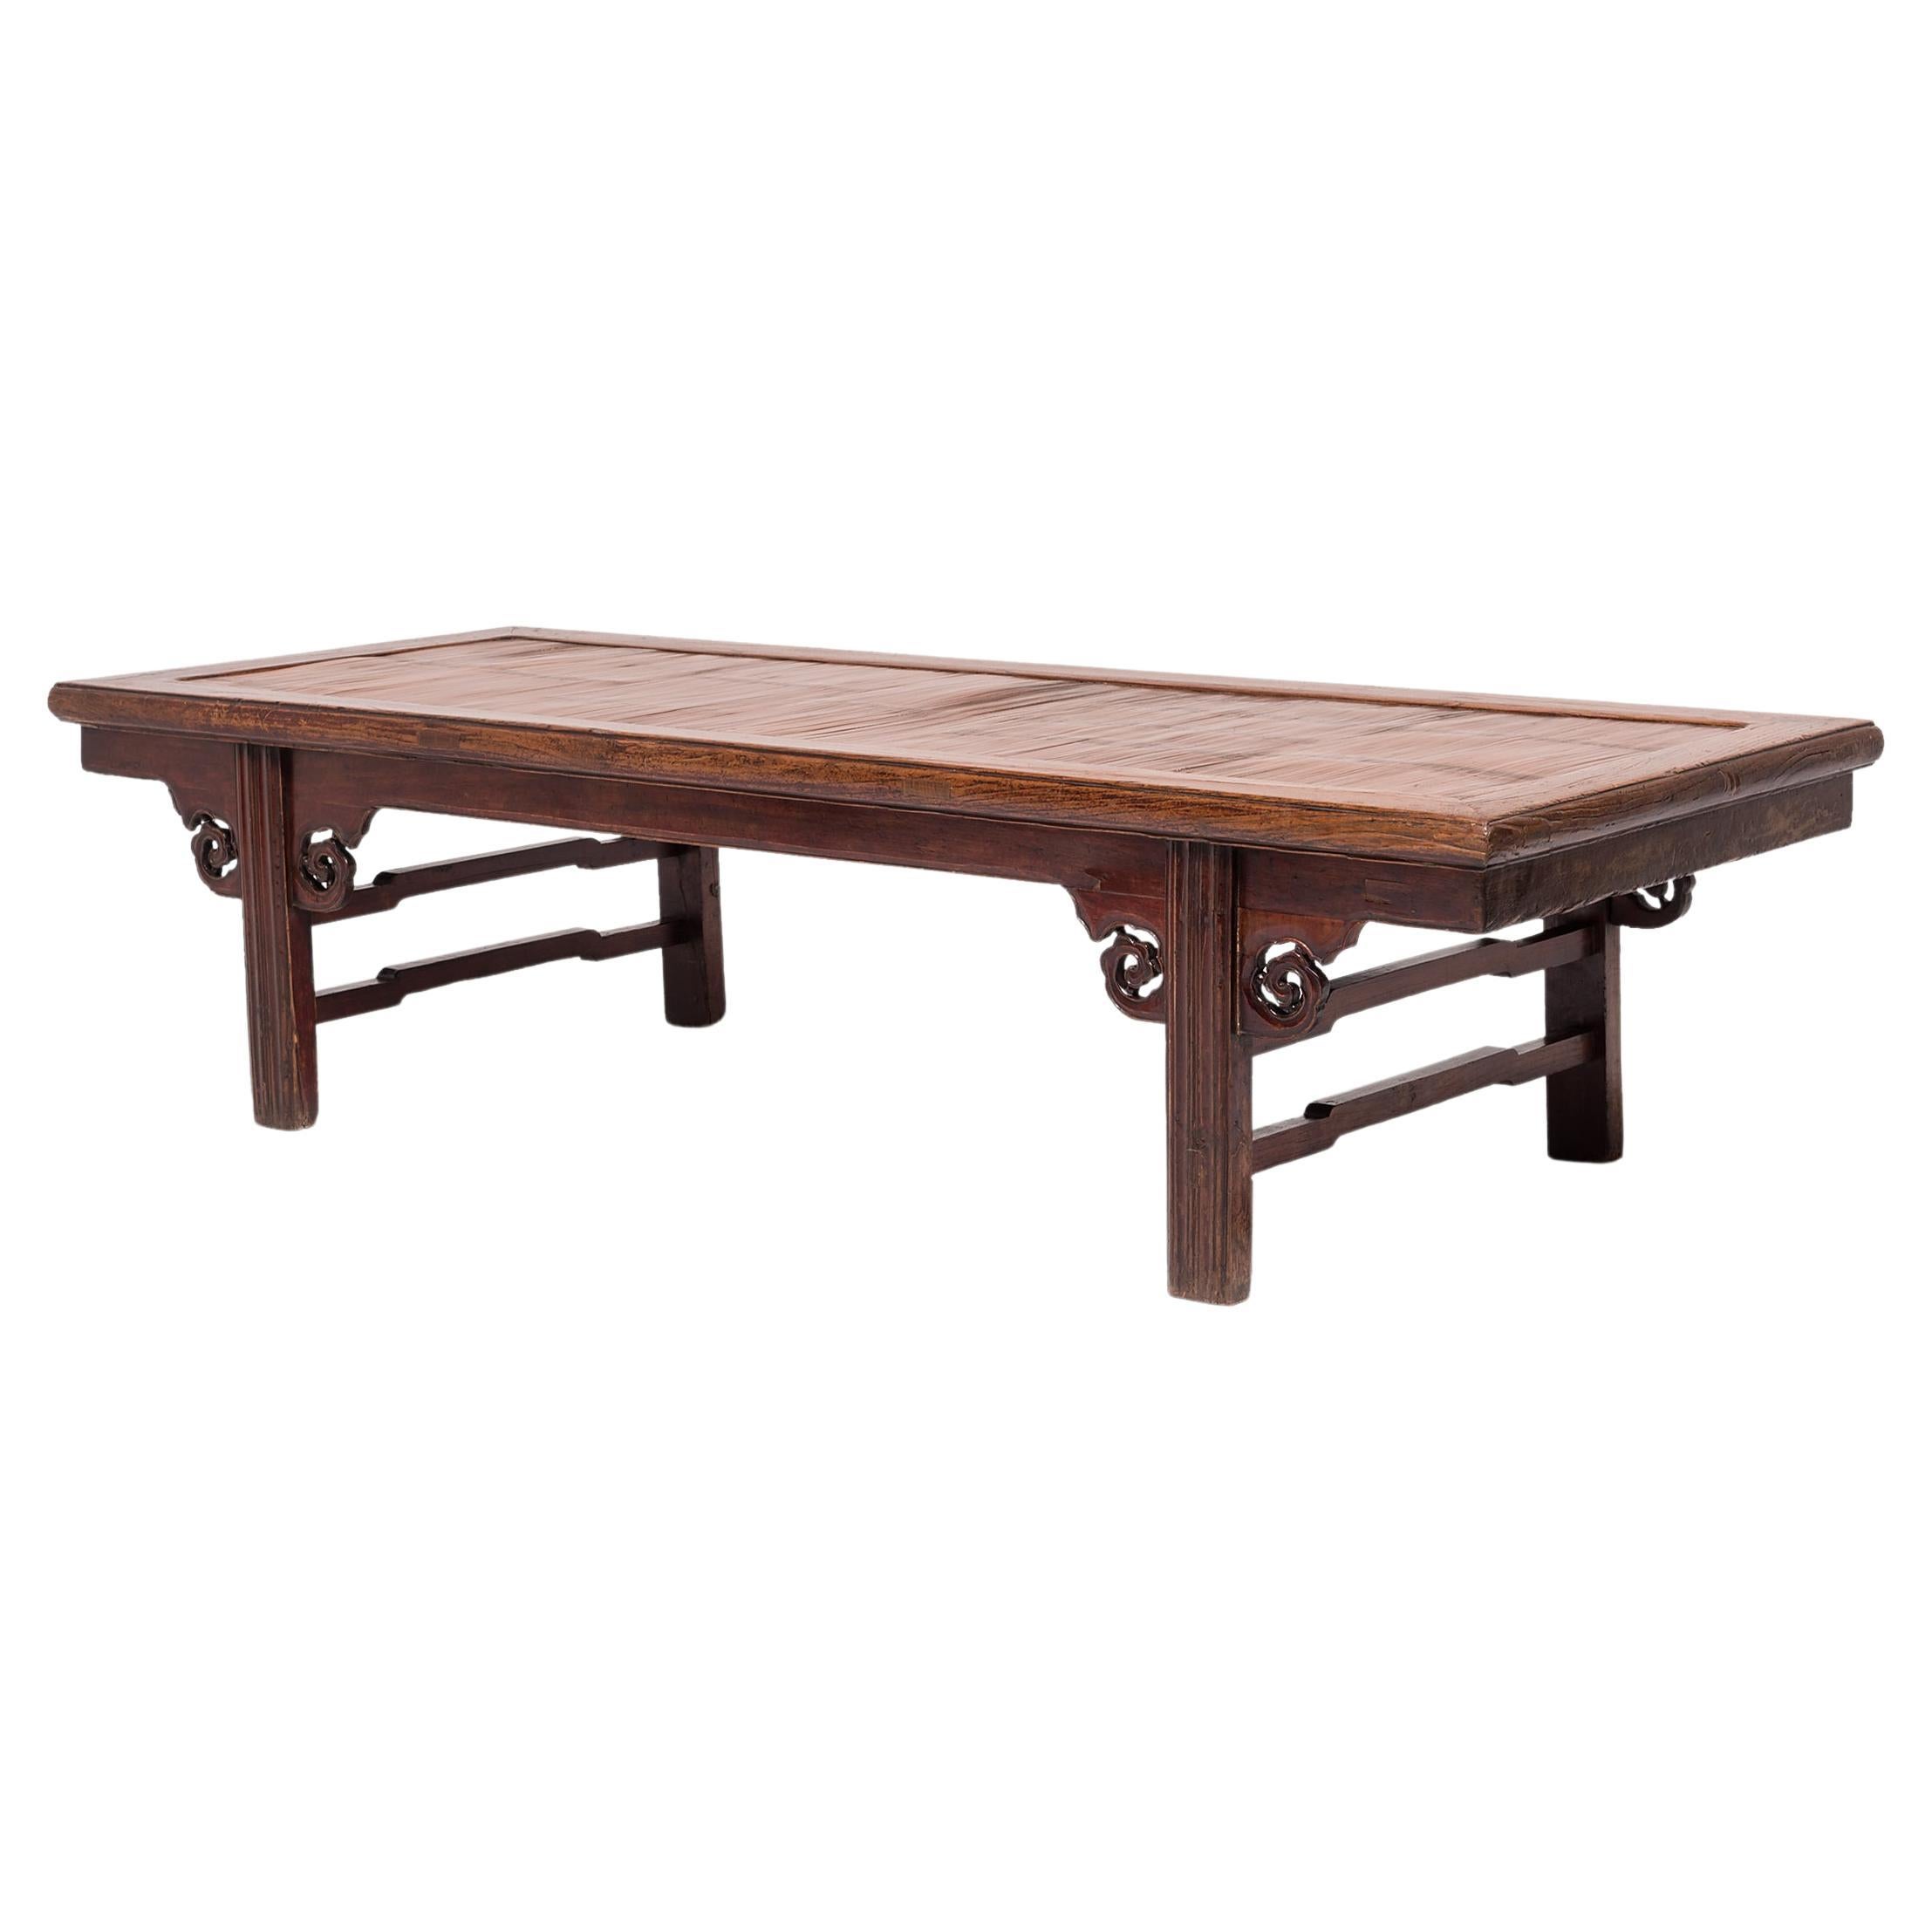 Low Chinese Kang Table with Spiral Spandrels, c. 1850